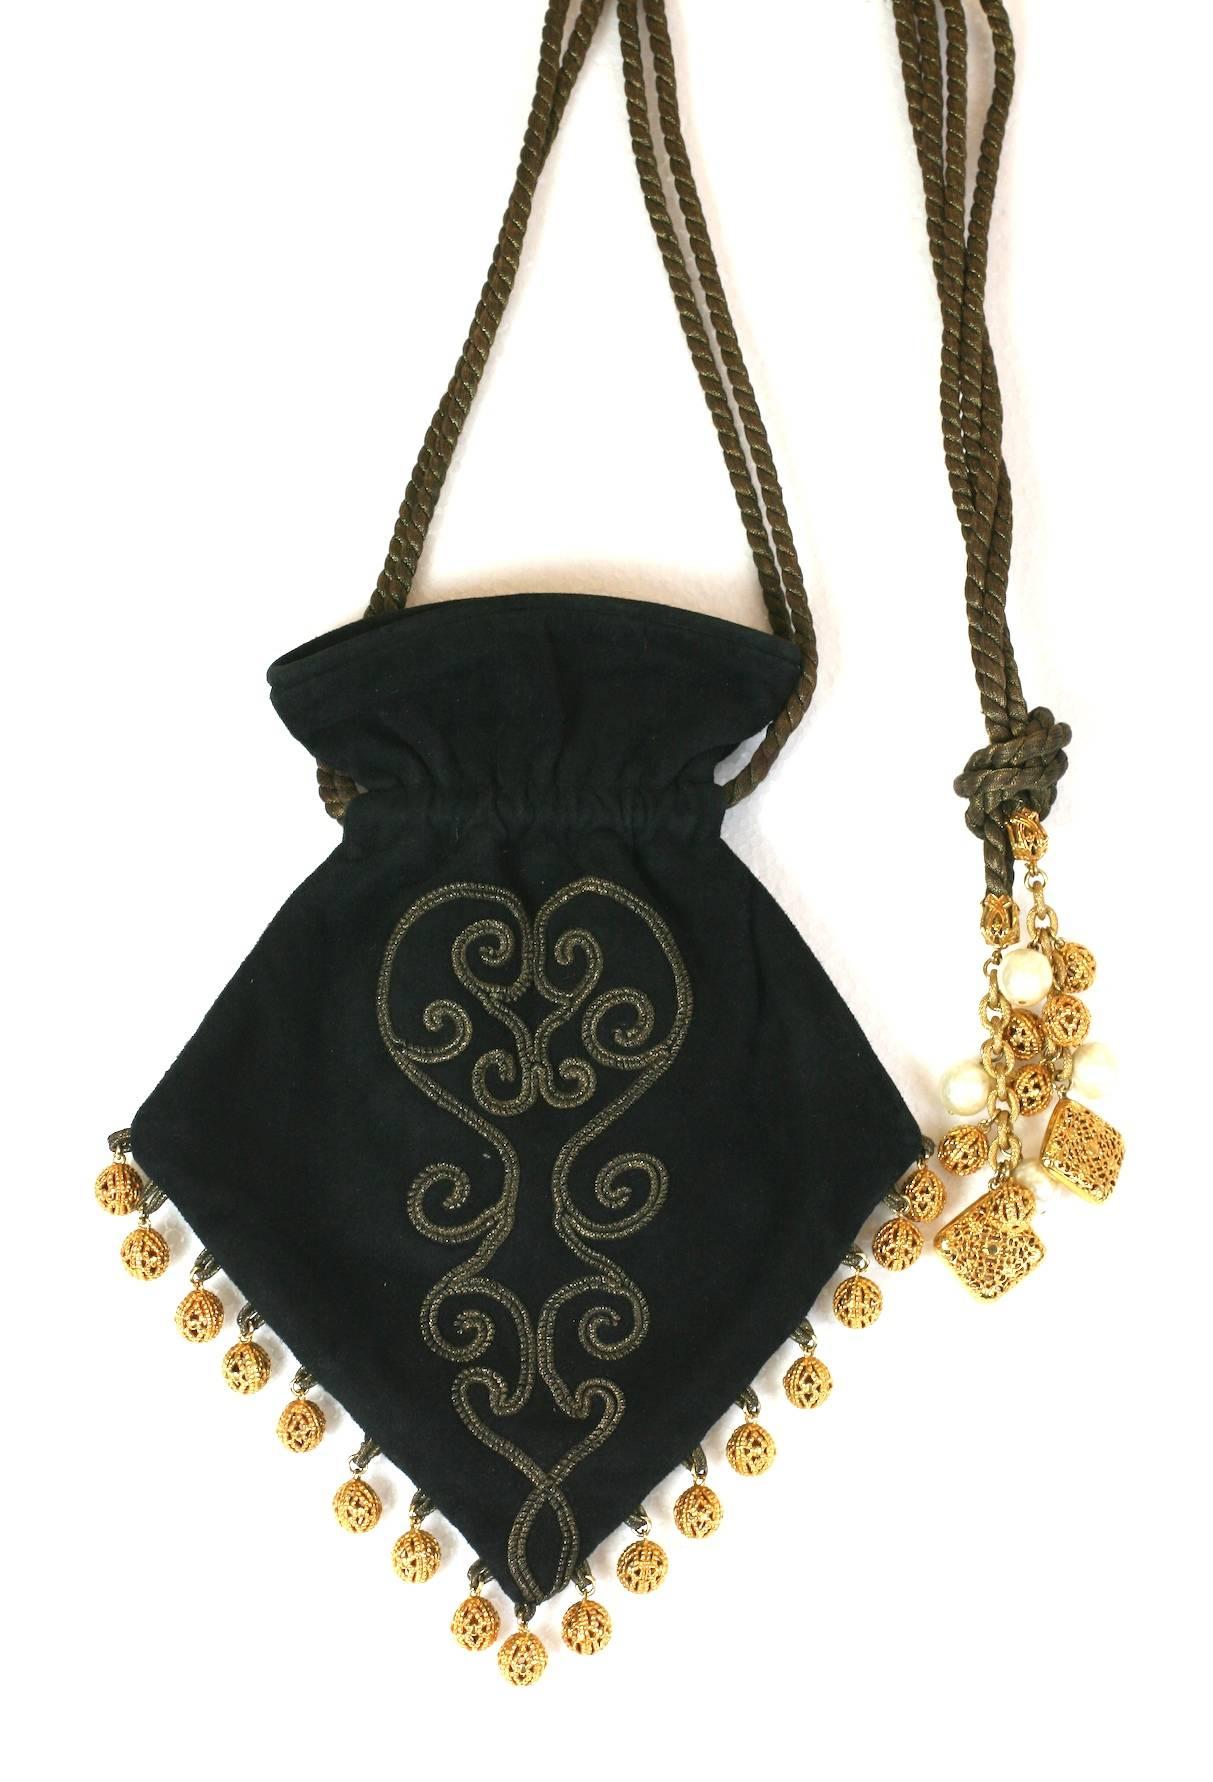 Dominique Aurentis Russian inspired evening drawstring bag, made of black suede, gilt soutache and twisted gilt cord. Further embellished with gold metal filigree ball fringes at the hem and strap (with pearls as well).
Excellent Condition. 1980's